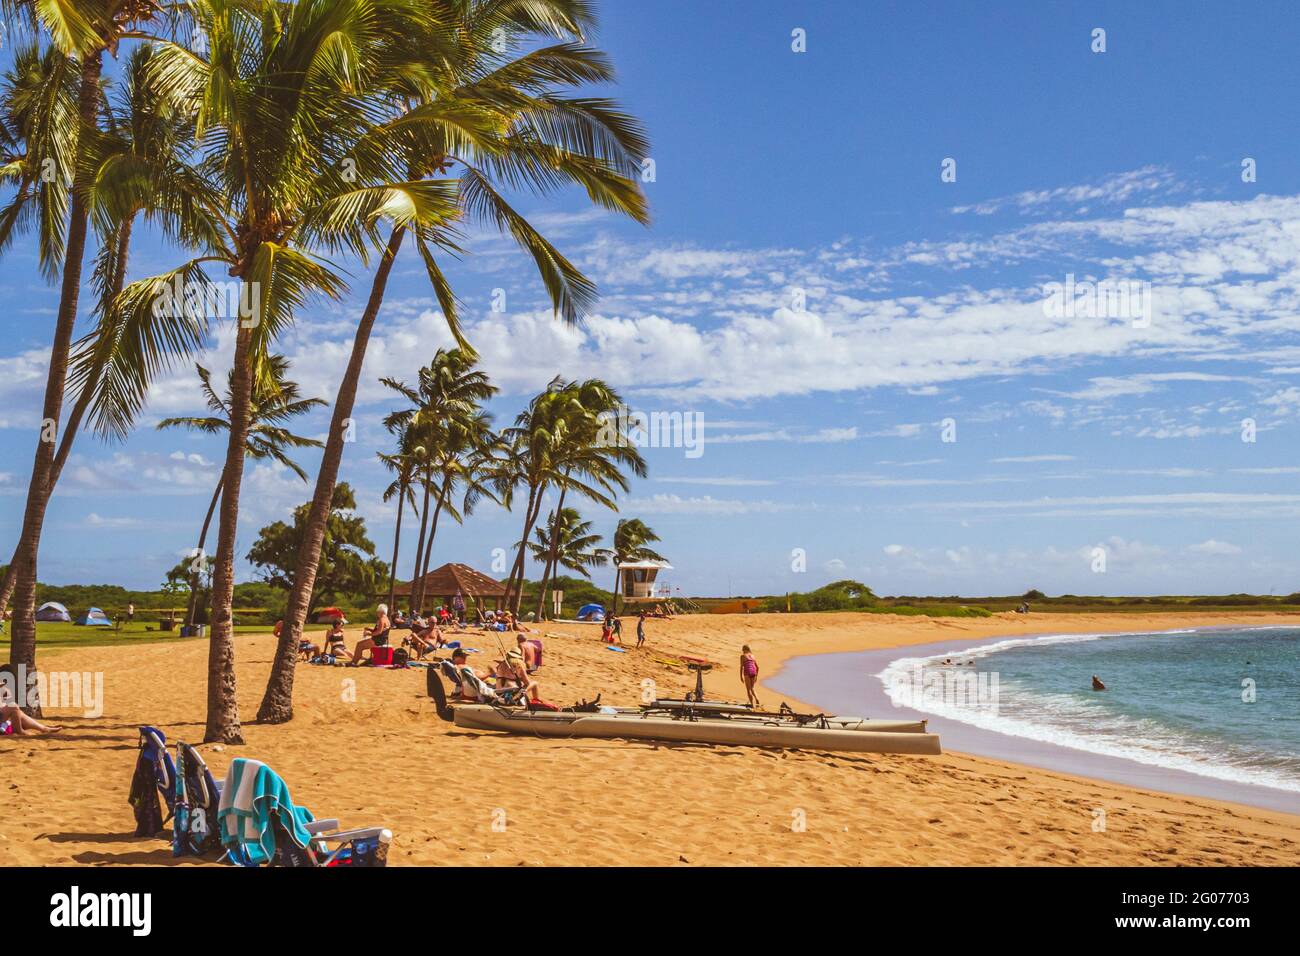 People enjoy tropical paradise beach views in Hawaii on sunny day Stock Photo